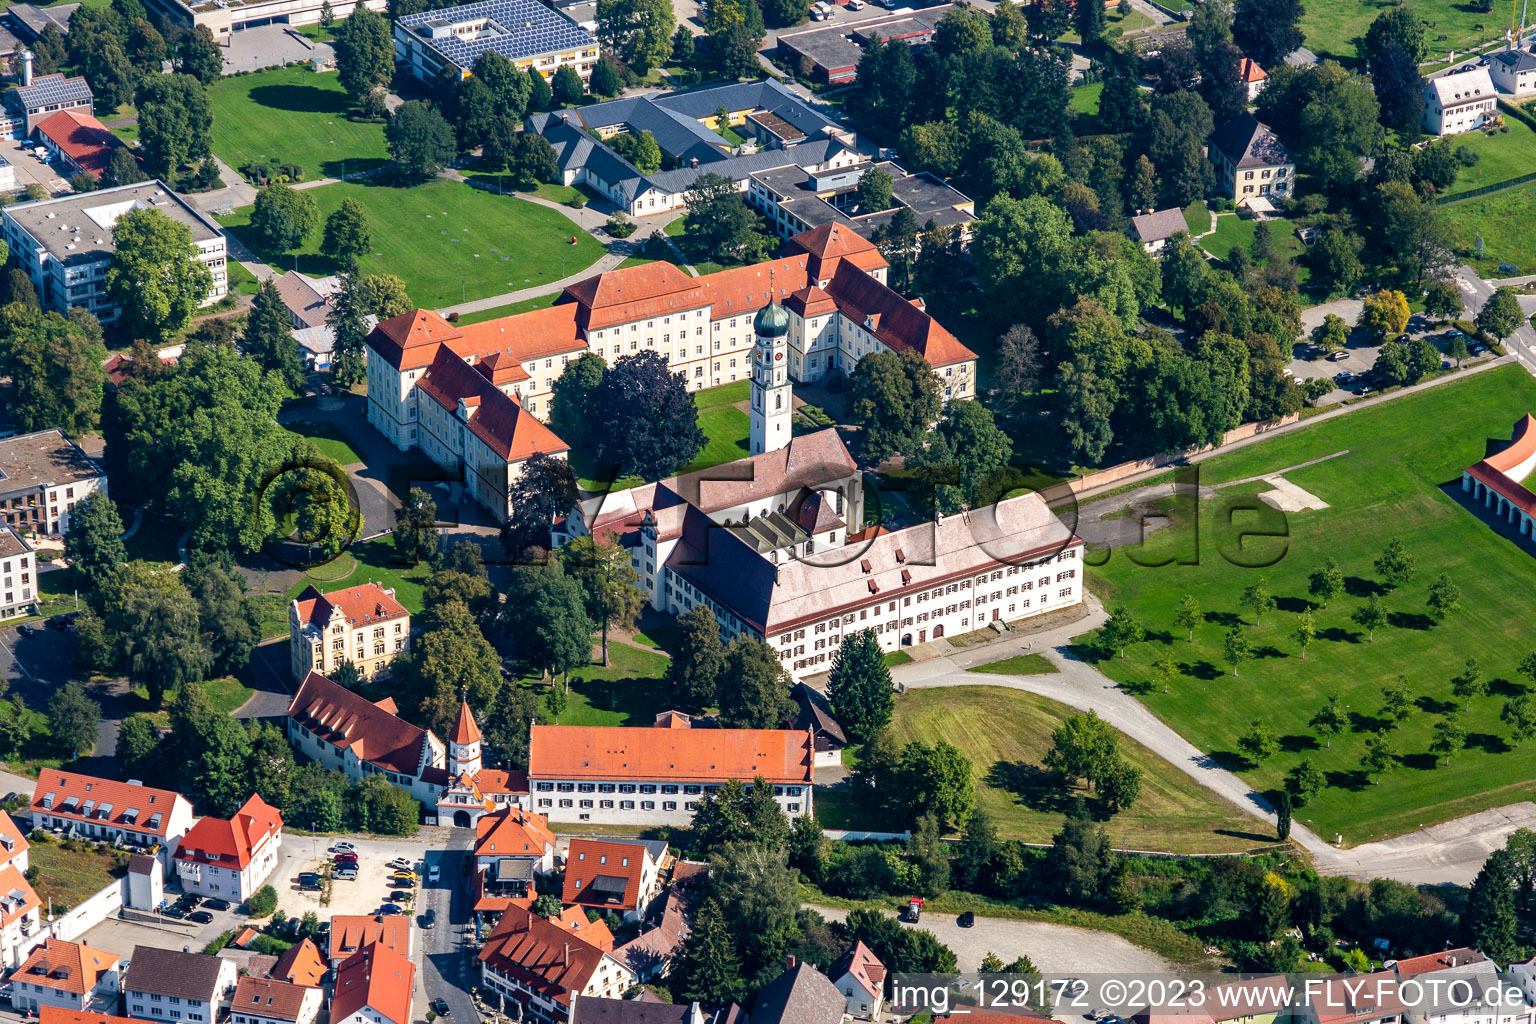 Complex of buildings of the monastery in Bad Schussenried in the state Baden-Wuerttemberg, Germany from above